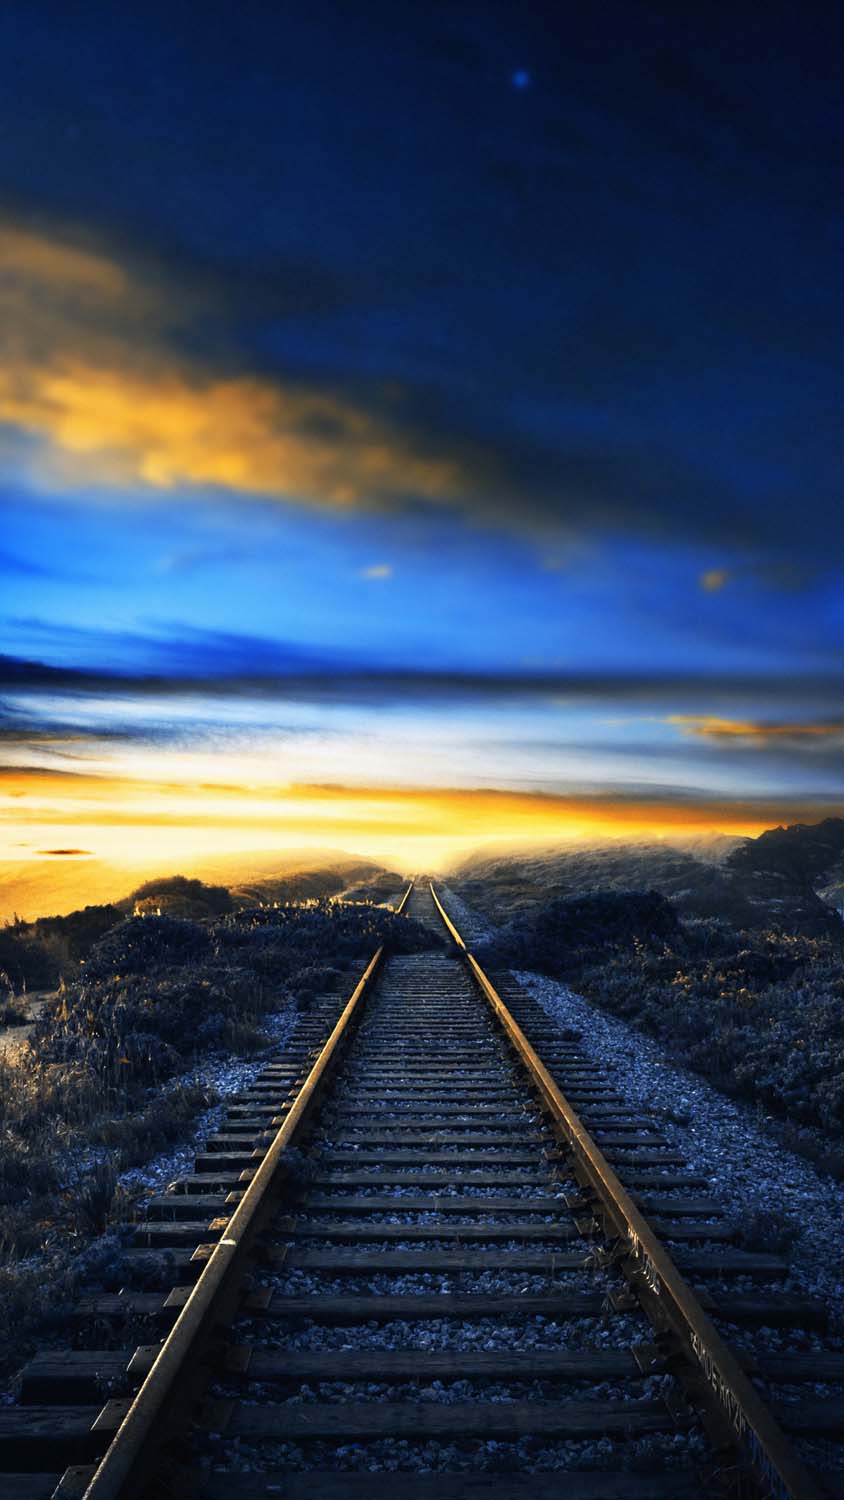 Train Track IPhone Wallpaper HD - IPhone Wallpapers : iPhone Wallpapers